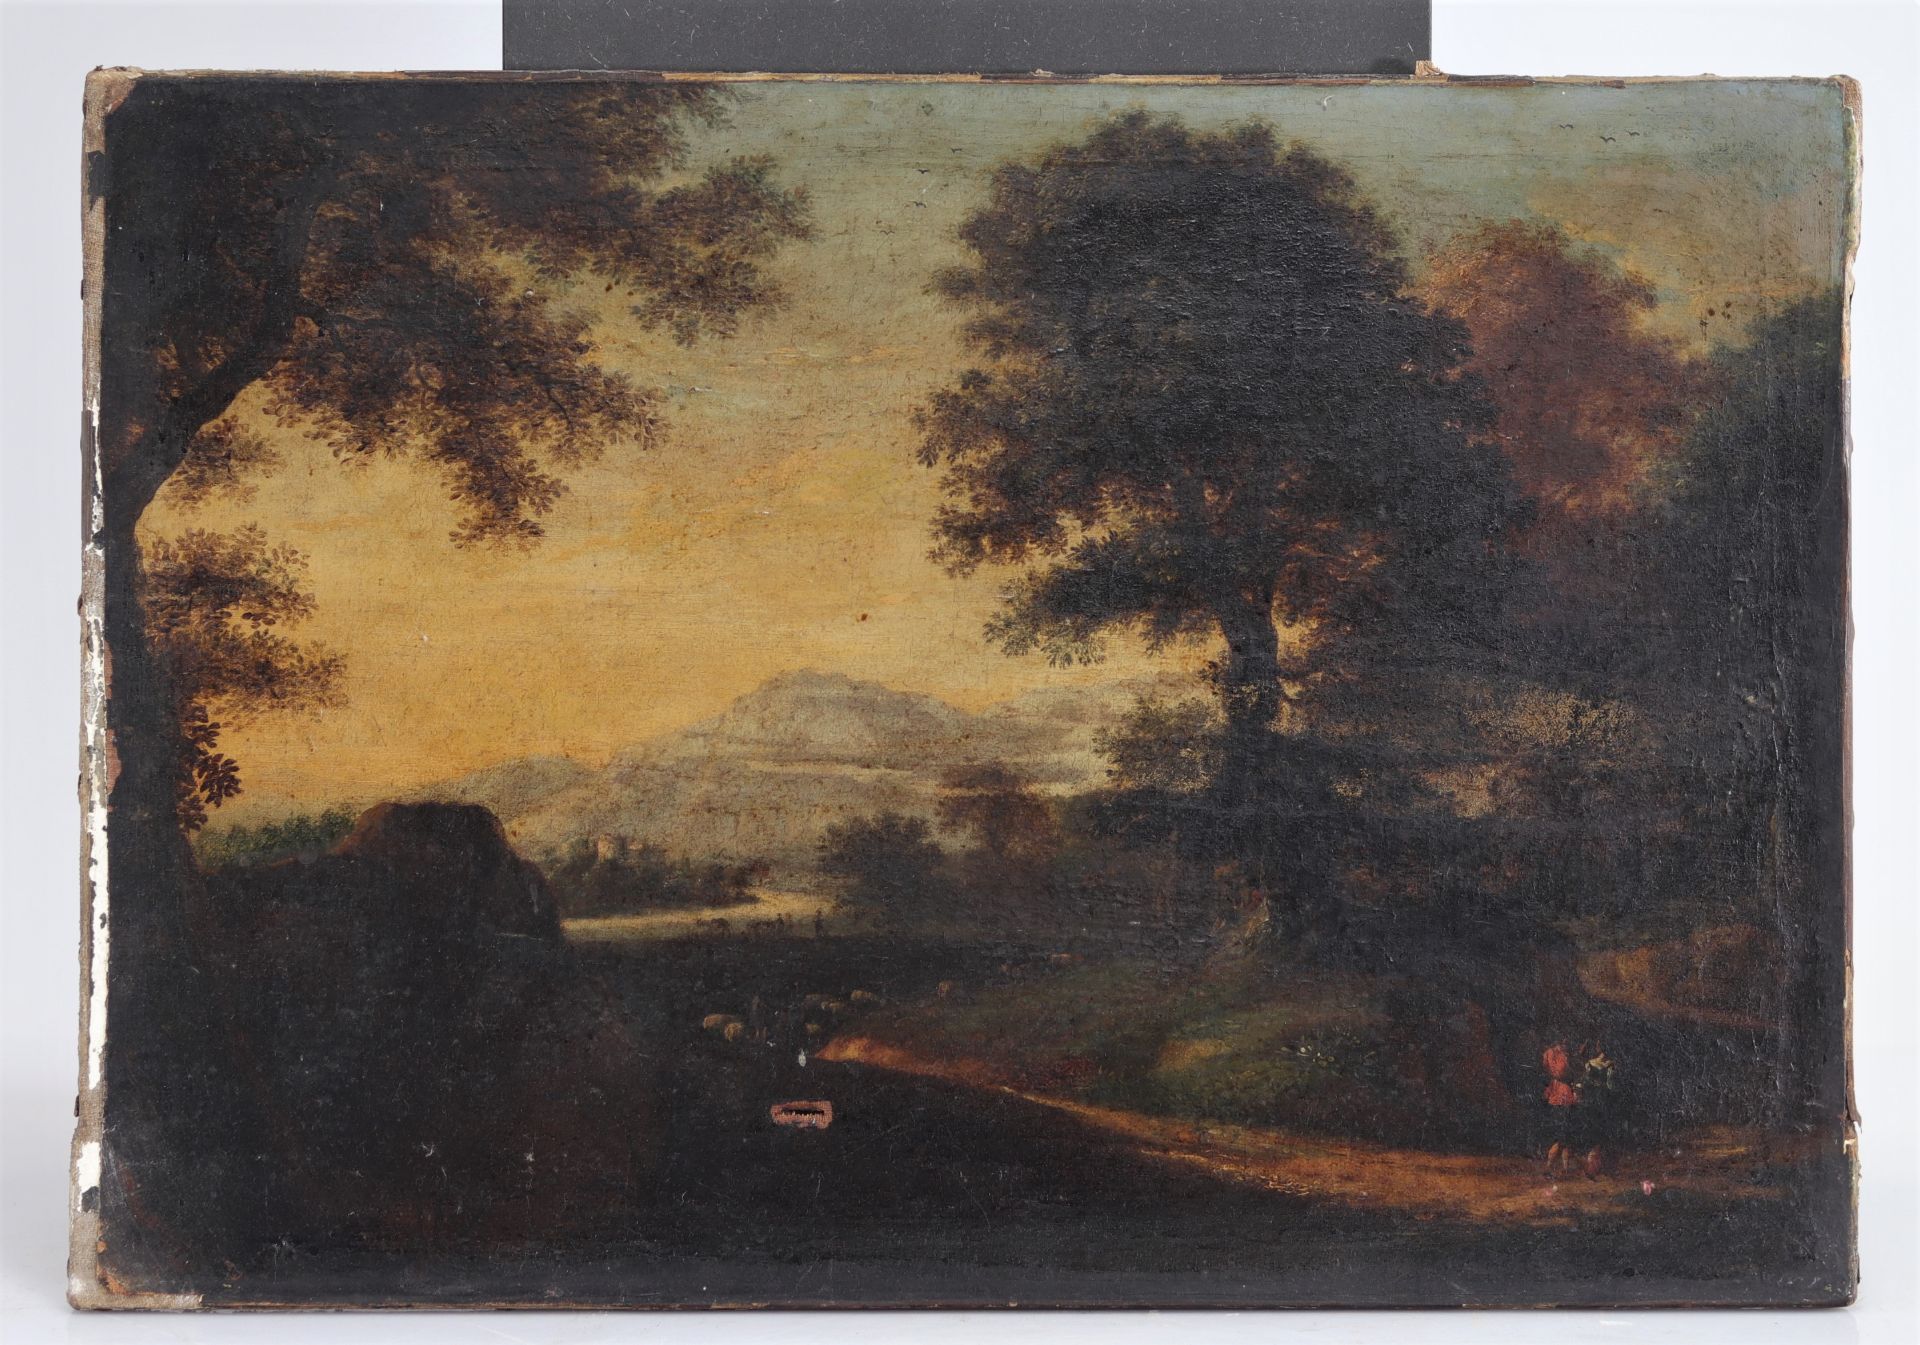 Oil on canvas "Landscape with figures" from the 17th century - Image 2 of 2